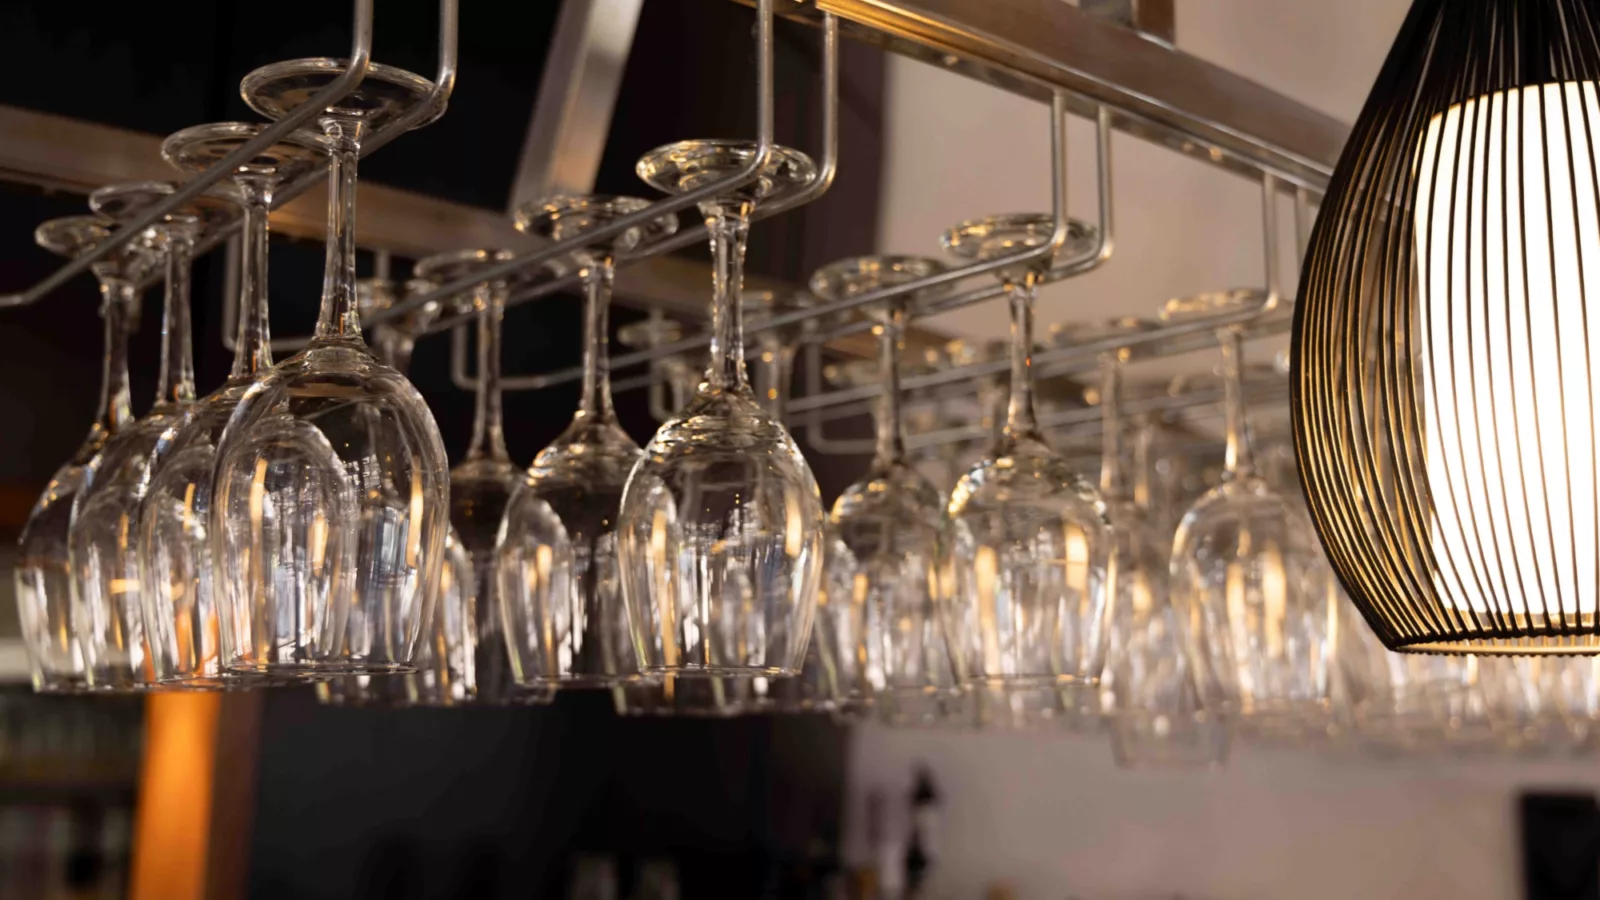 Glassware hanging above the bar